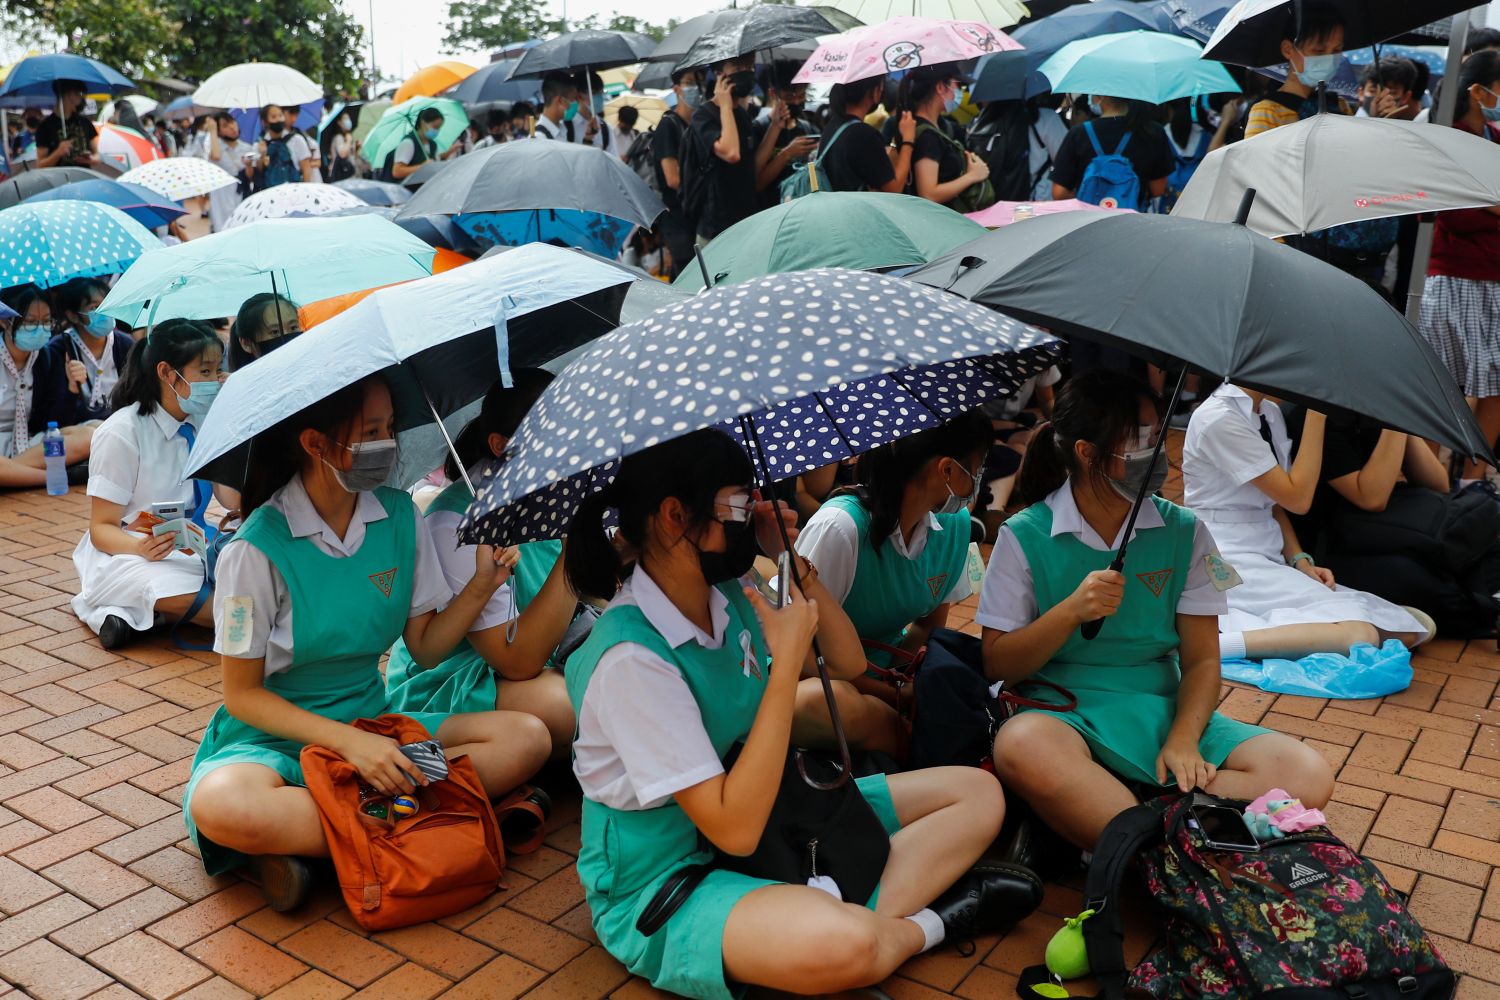 Hong Kong students rally peacefully after weekend violence